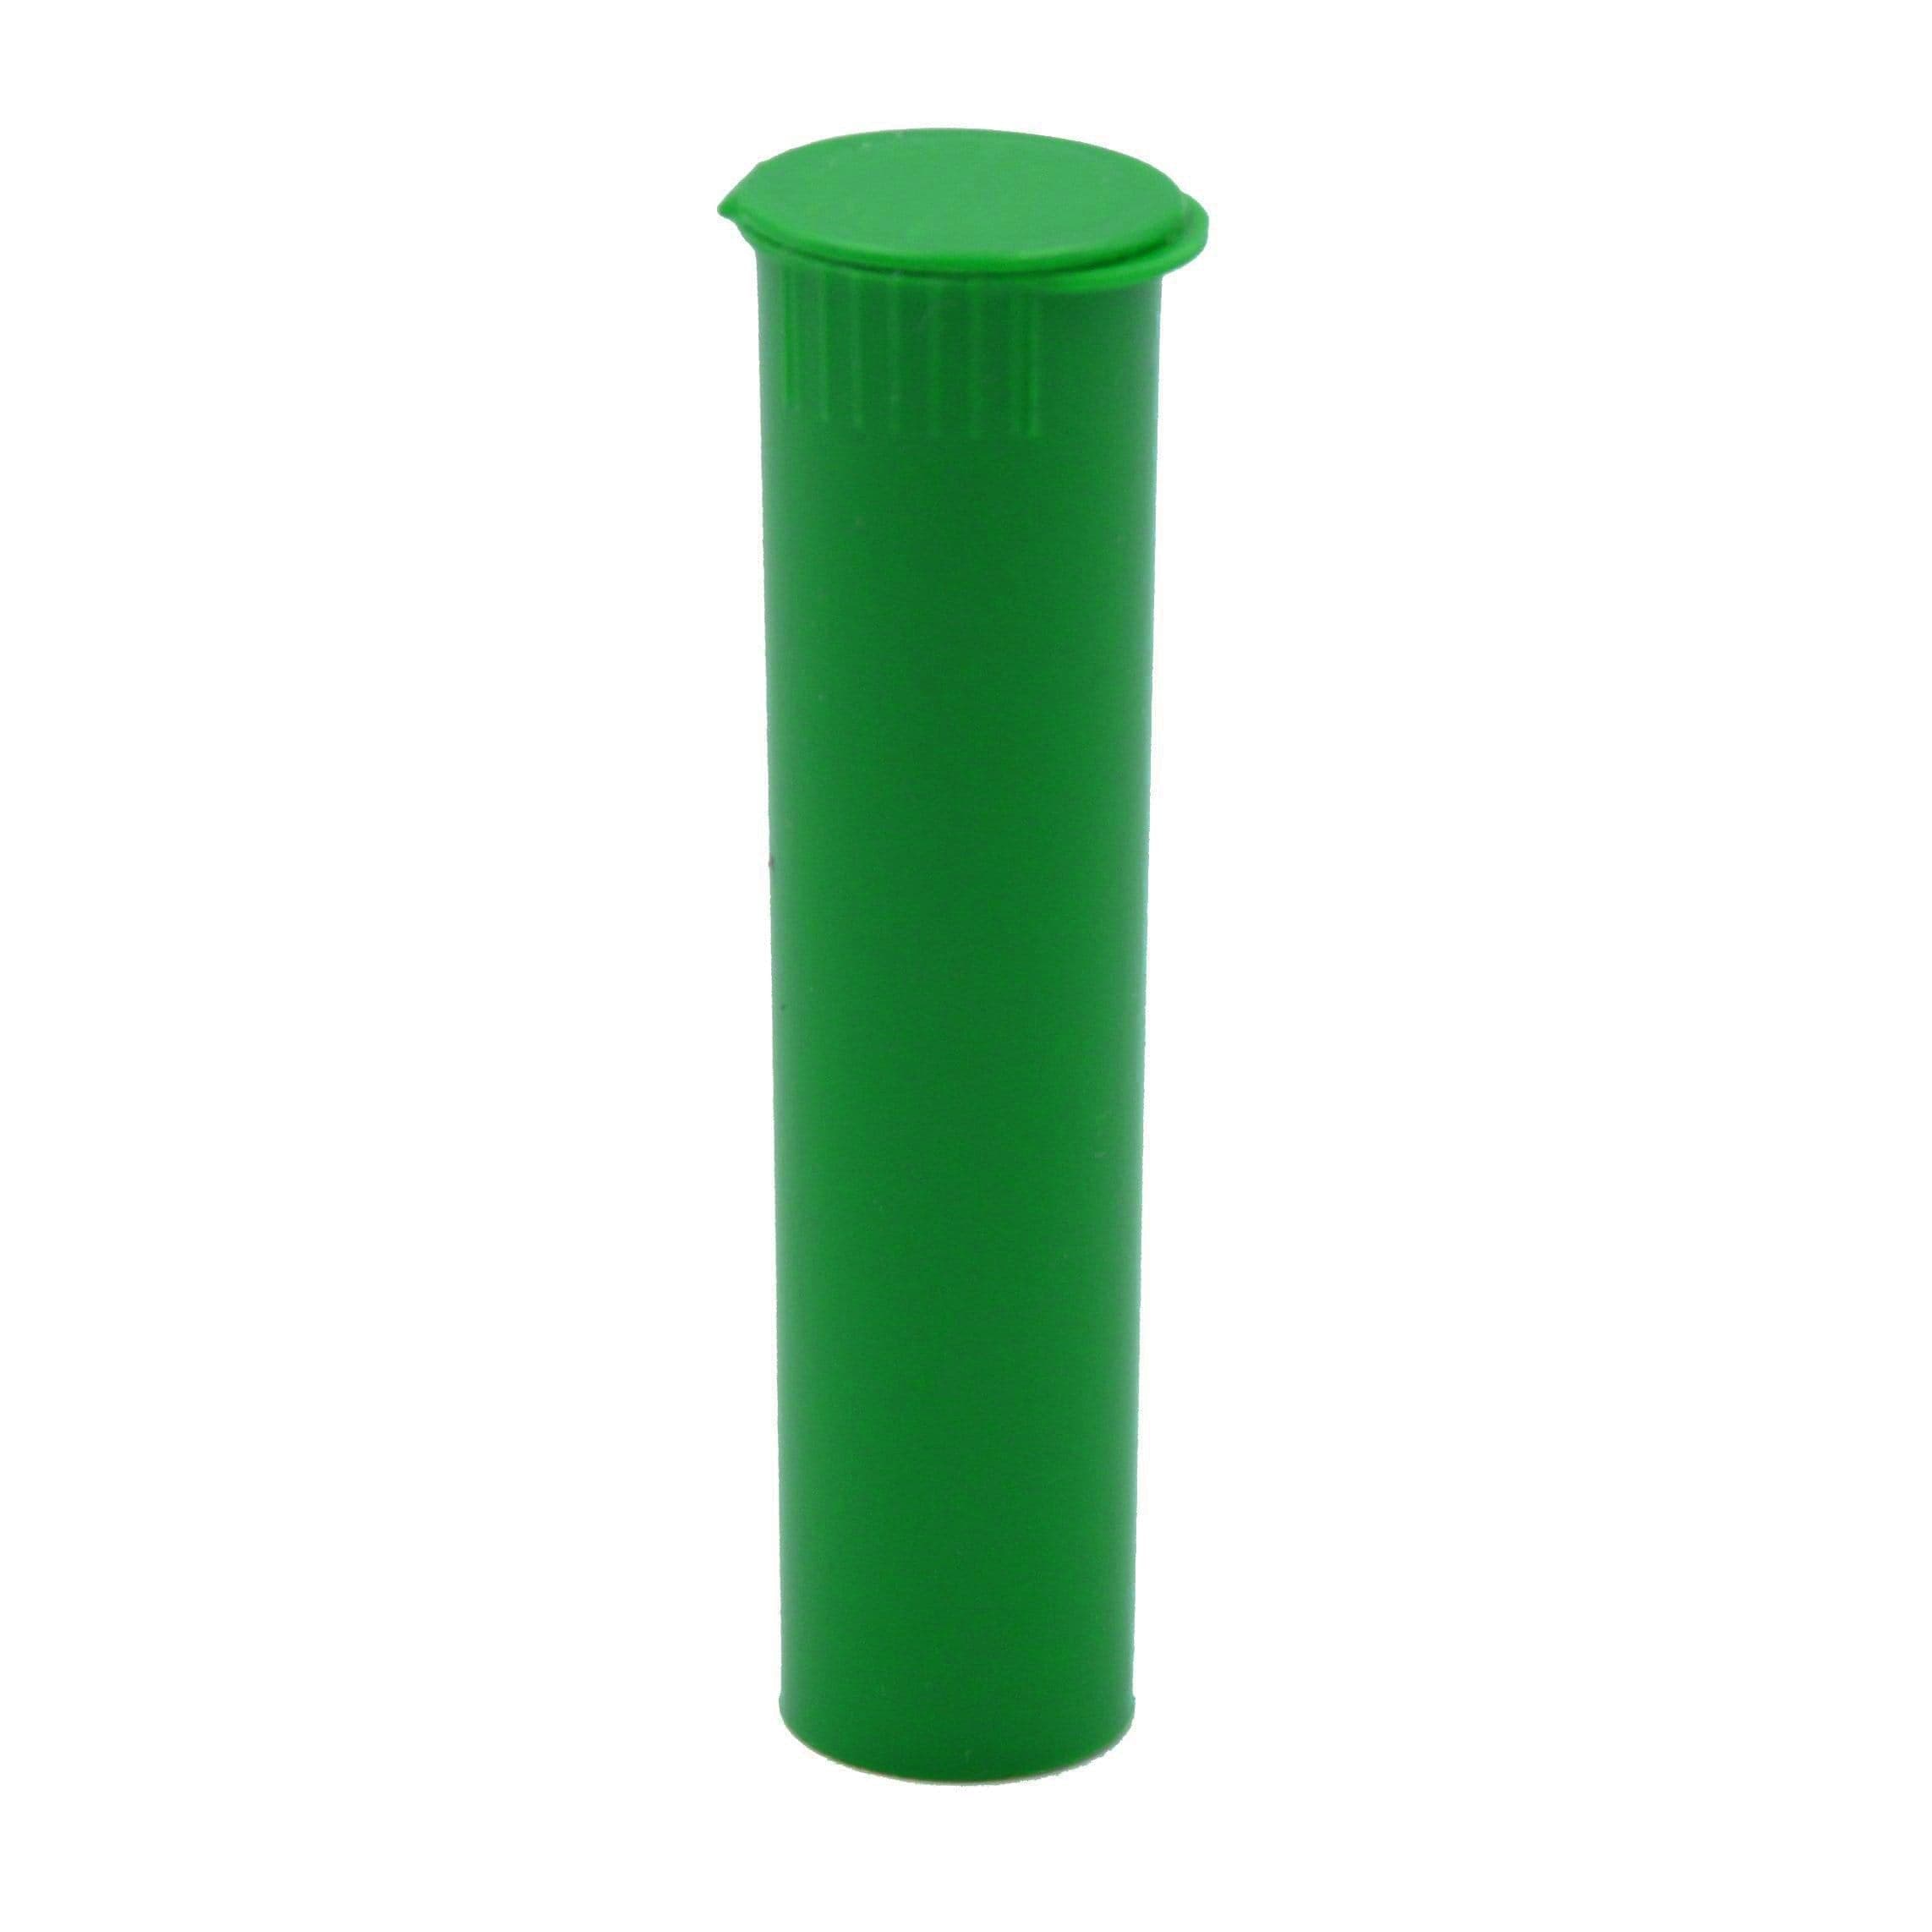 Clearance Squeeze Top Child-Resistant Pre-Roll Tube | 78 mm Green / Box of 1000 (Bulk Pricing)